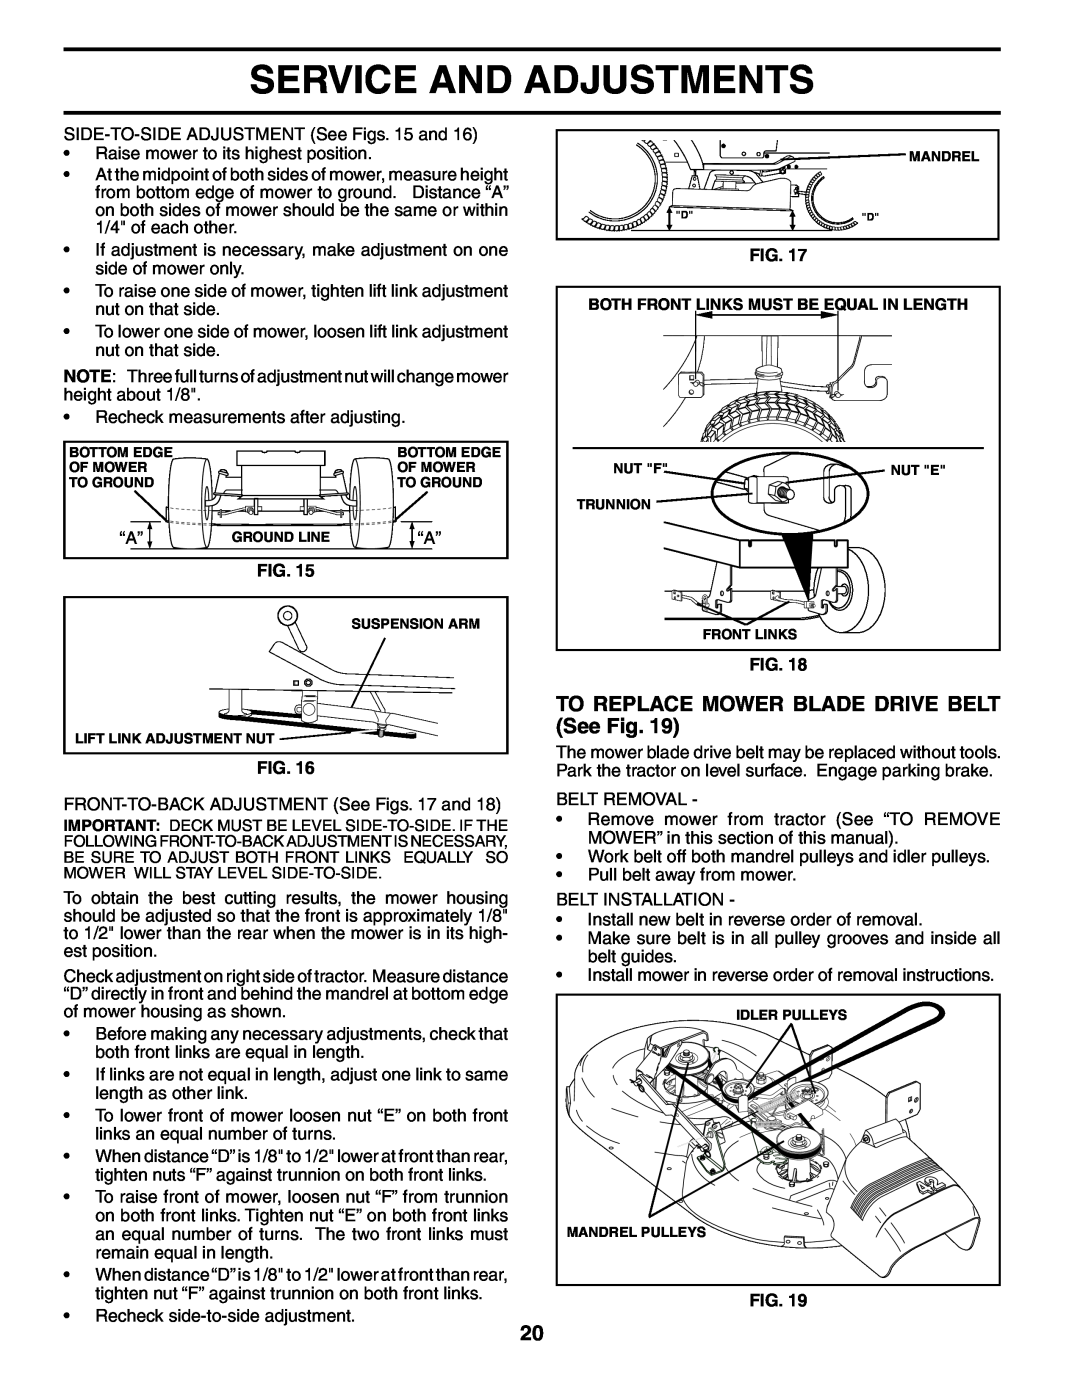 Poulan 191984 manual TO REPLACE MOWER BLADE DRIVE BELT See Fig, Service And Adjustments 